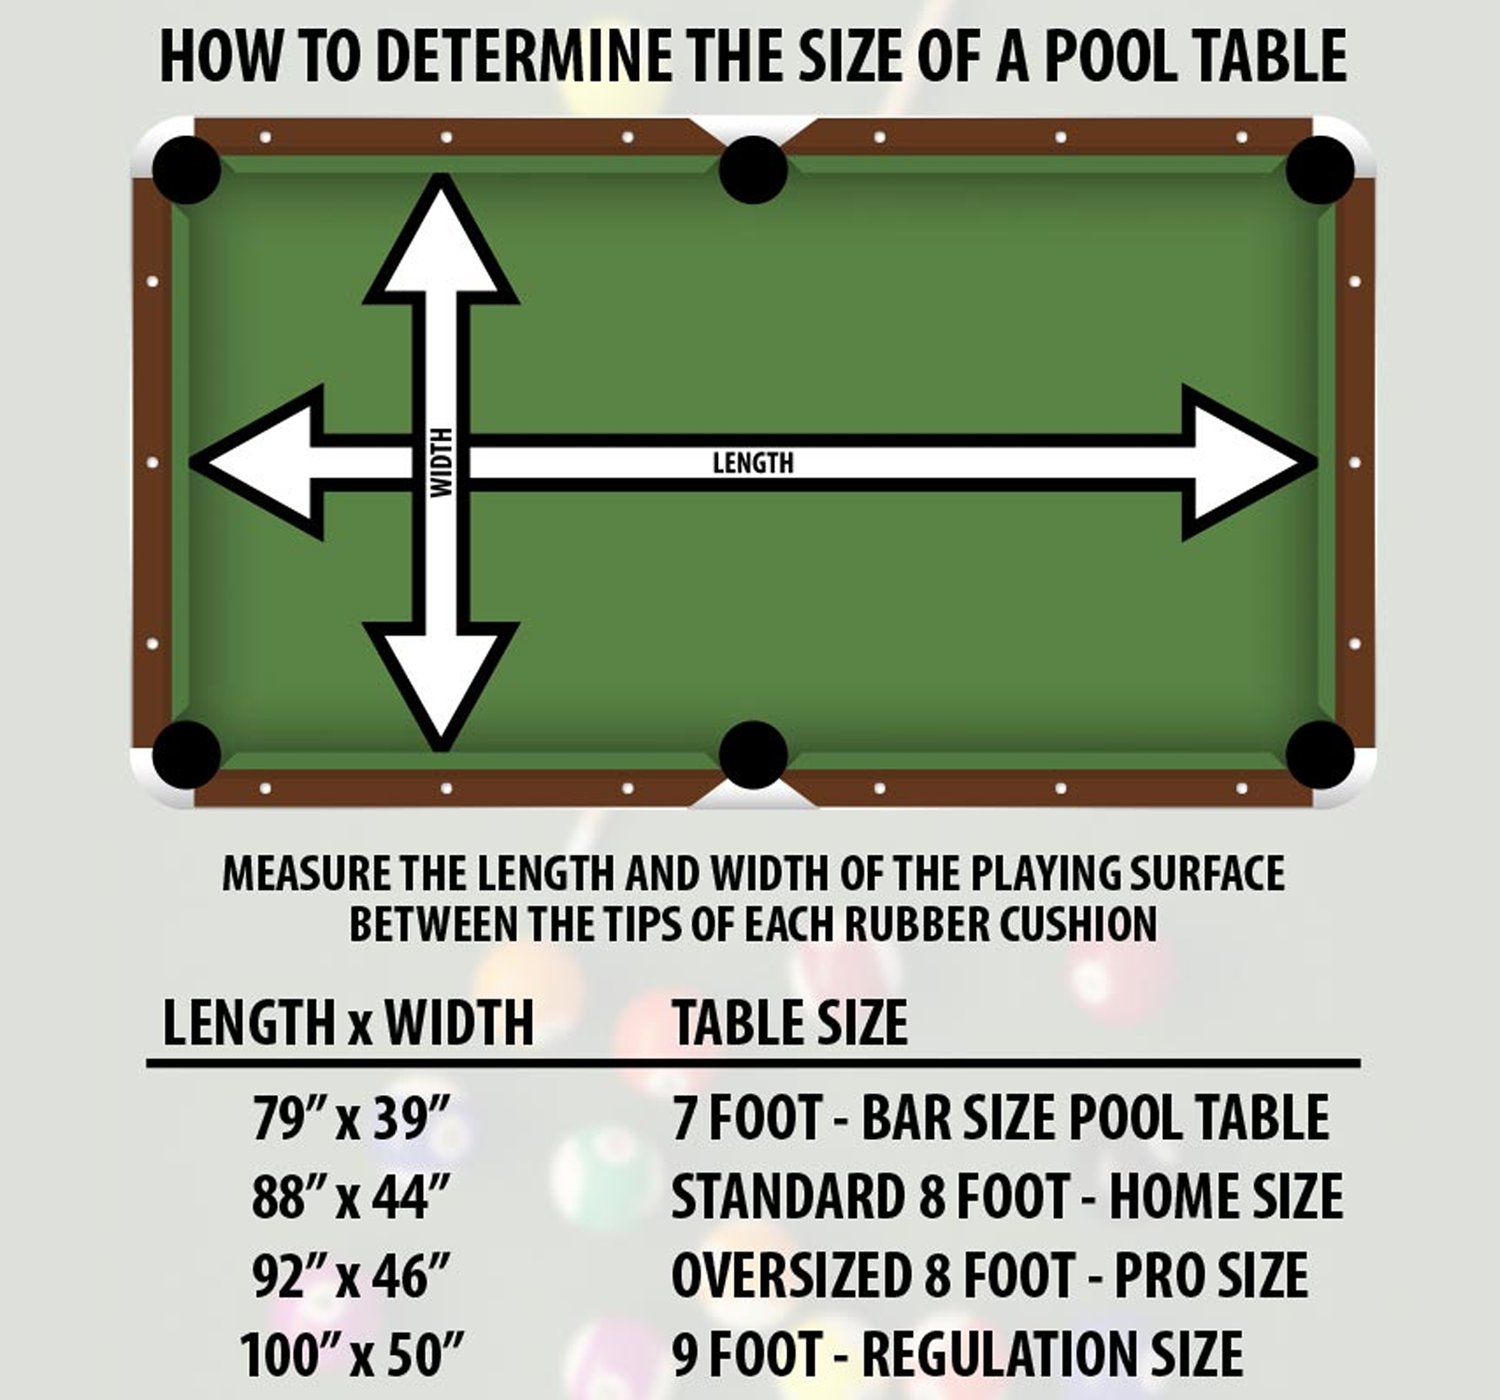 Table Size 